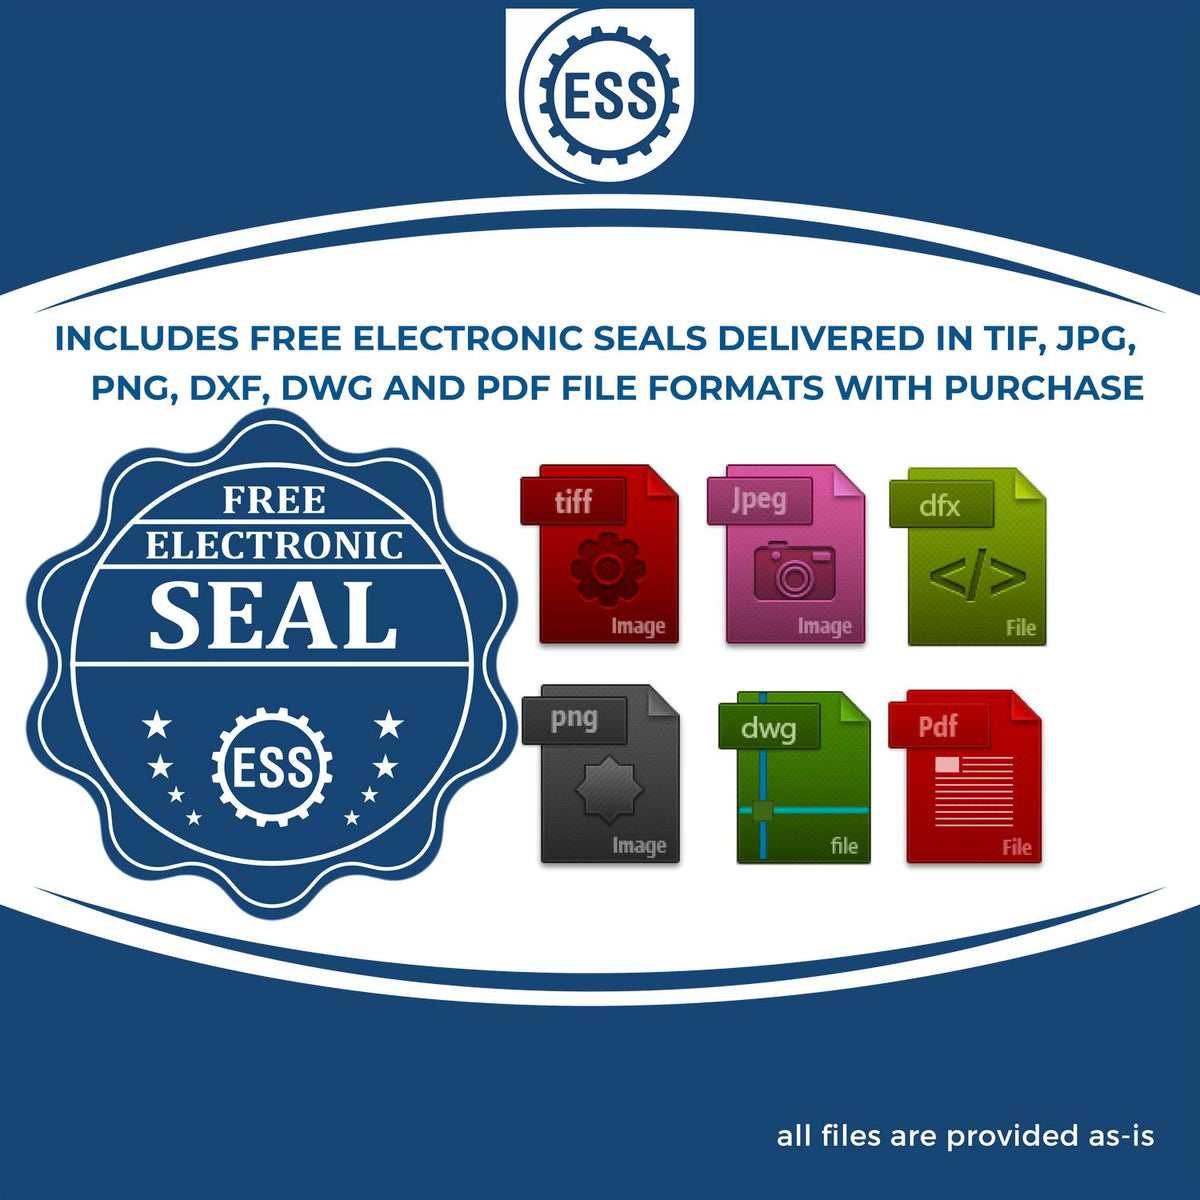 An infographic for the free electronic seal for the Gift Virginia Architect Seal illustrating the different file type icons such as DXF, DWG, TIF, JPG and PNG.